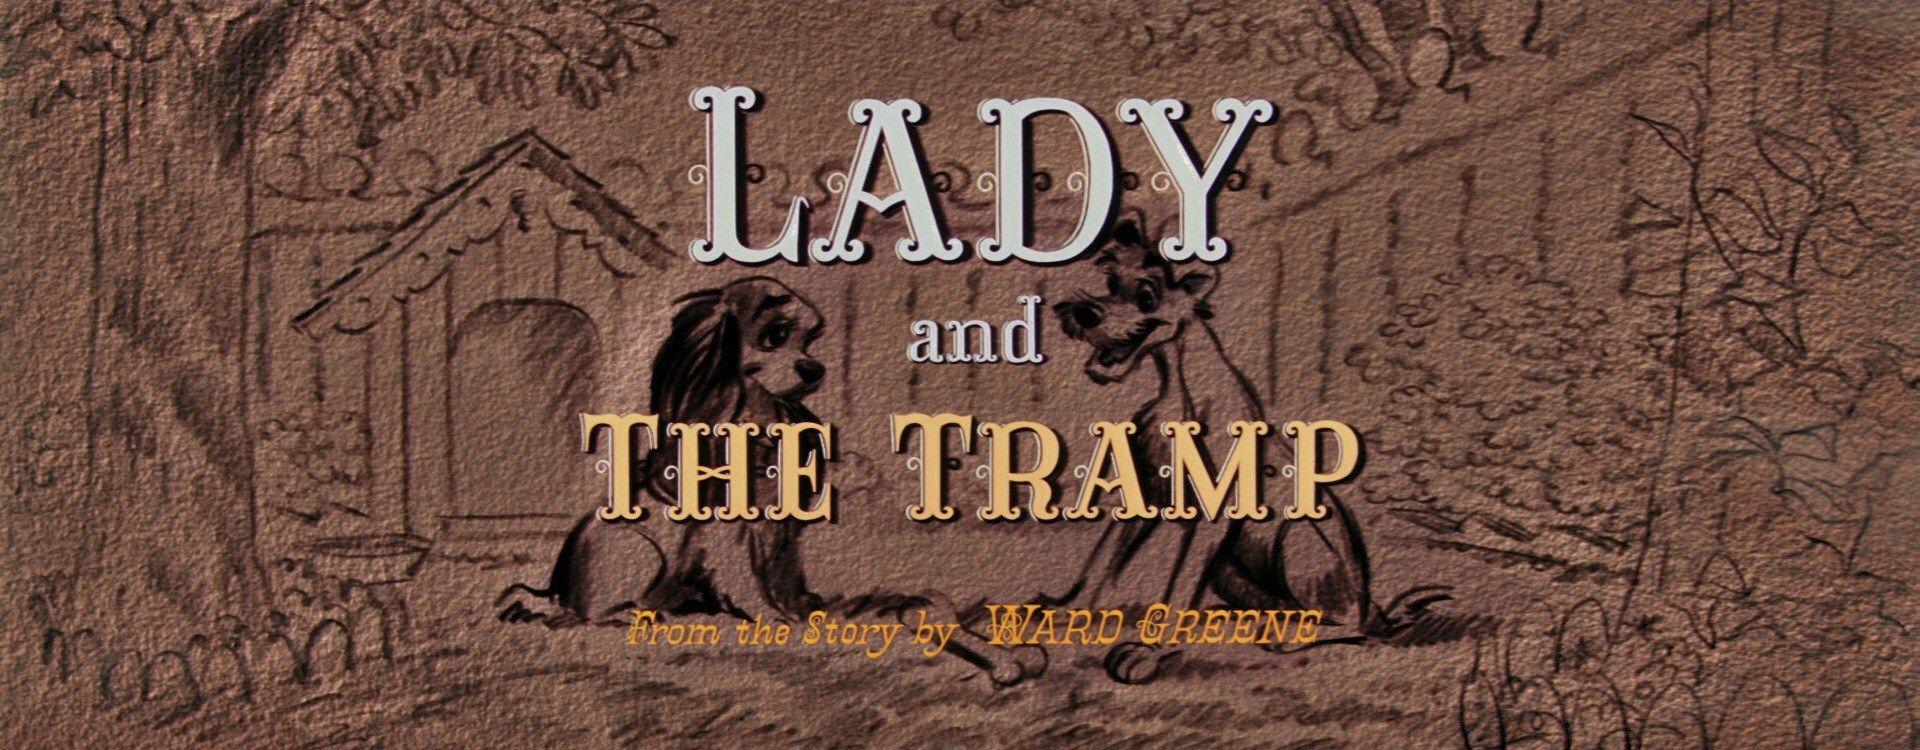 Lady and the Tramp Logo - Lady and the Tramp (1955) - Animation Screencaps